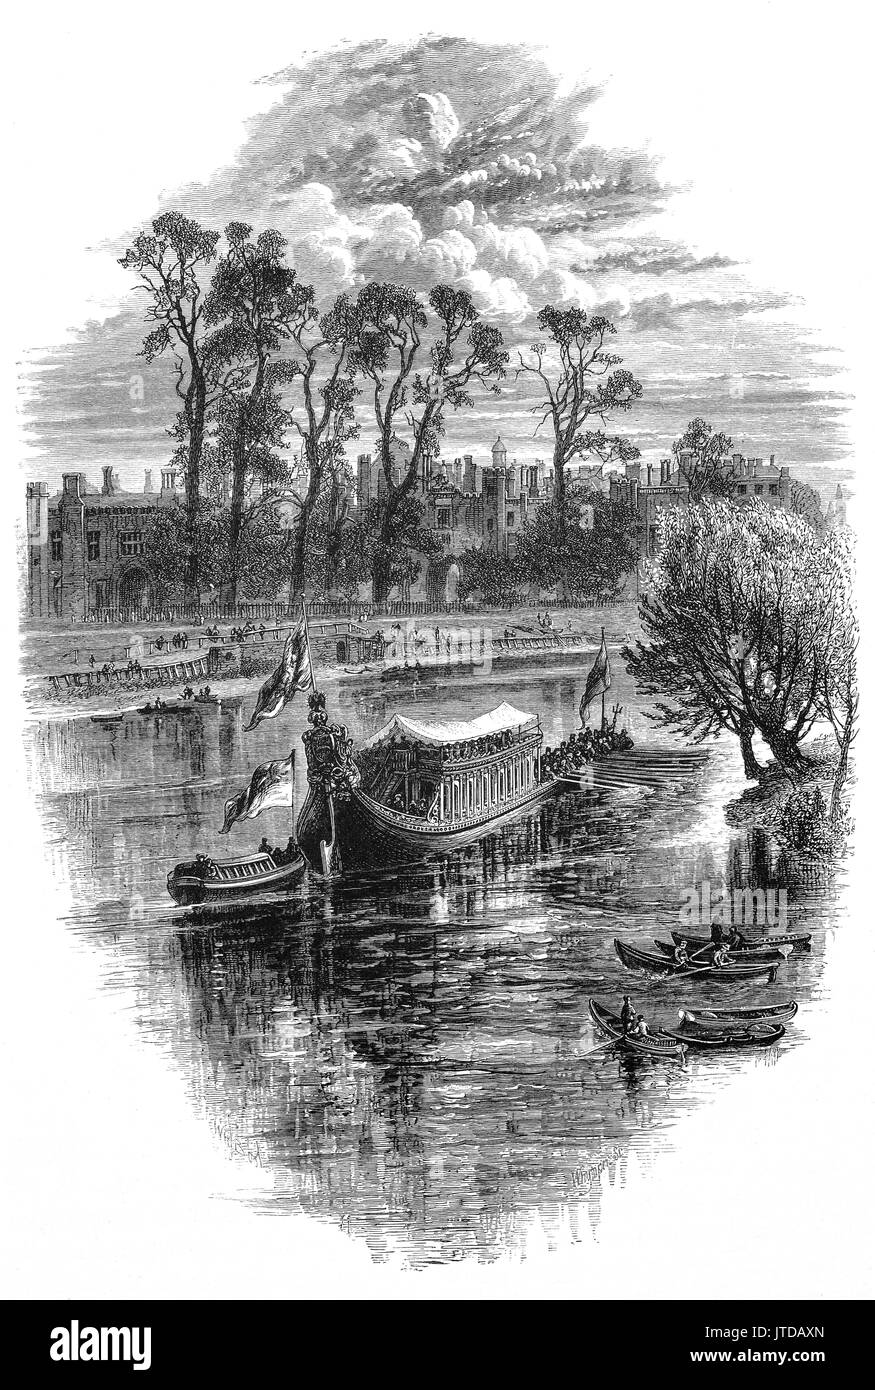 1870: A royal barge participating in the Gala Day on the River Thames at Hampton Court Palace in the borough of Richmond upon Thames, London, Surrey, England. Building of the palace began in 1515 for Cardinal Thomas Wolsey, a favourite of King Henry VIII and it was the first use of  Renaissance style architecture in Tudor England Stock Photo